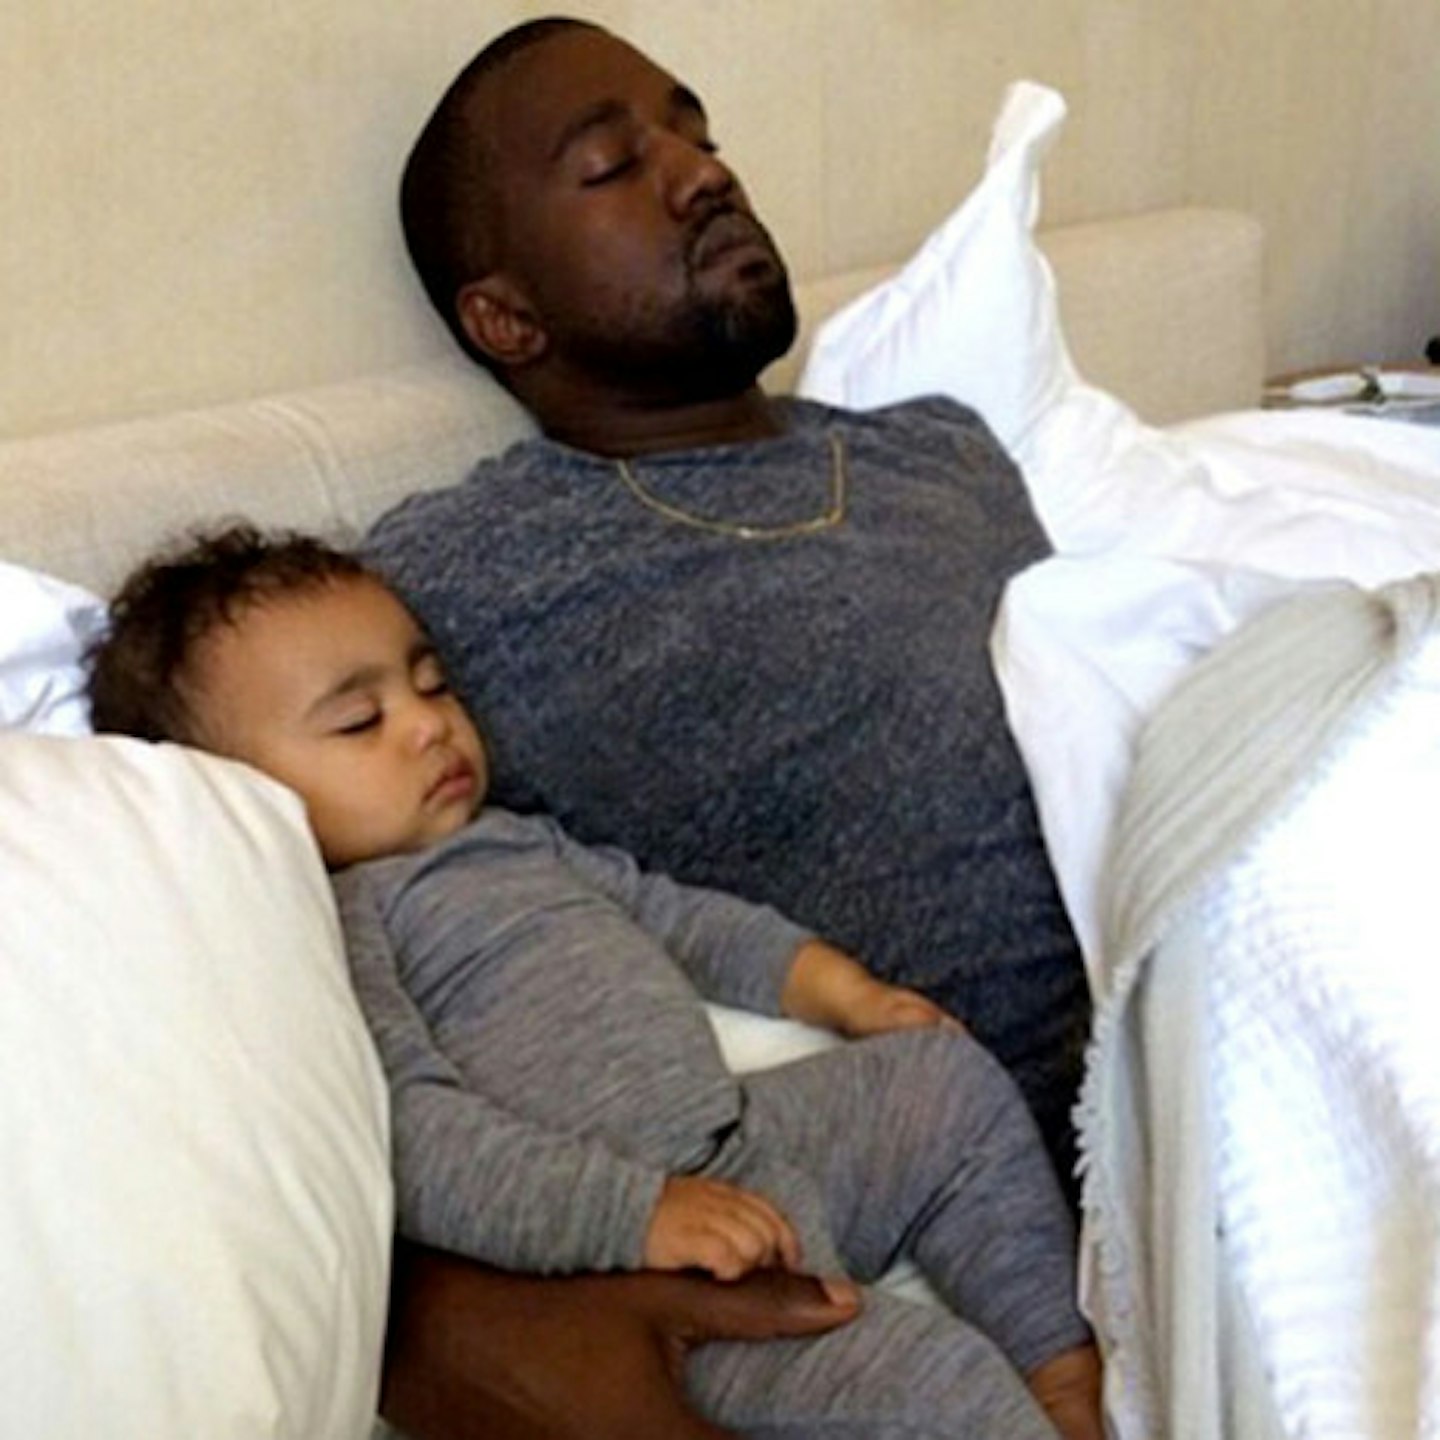 Kanye said that watching North grow is the meaning of life